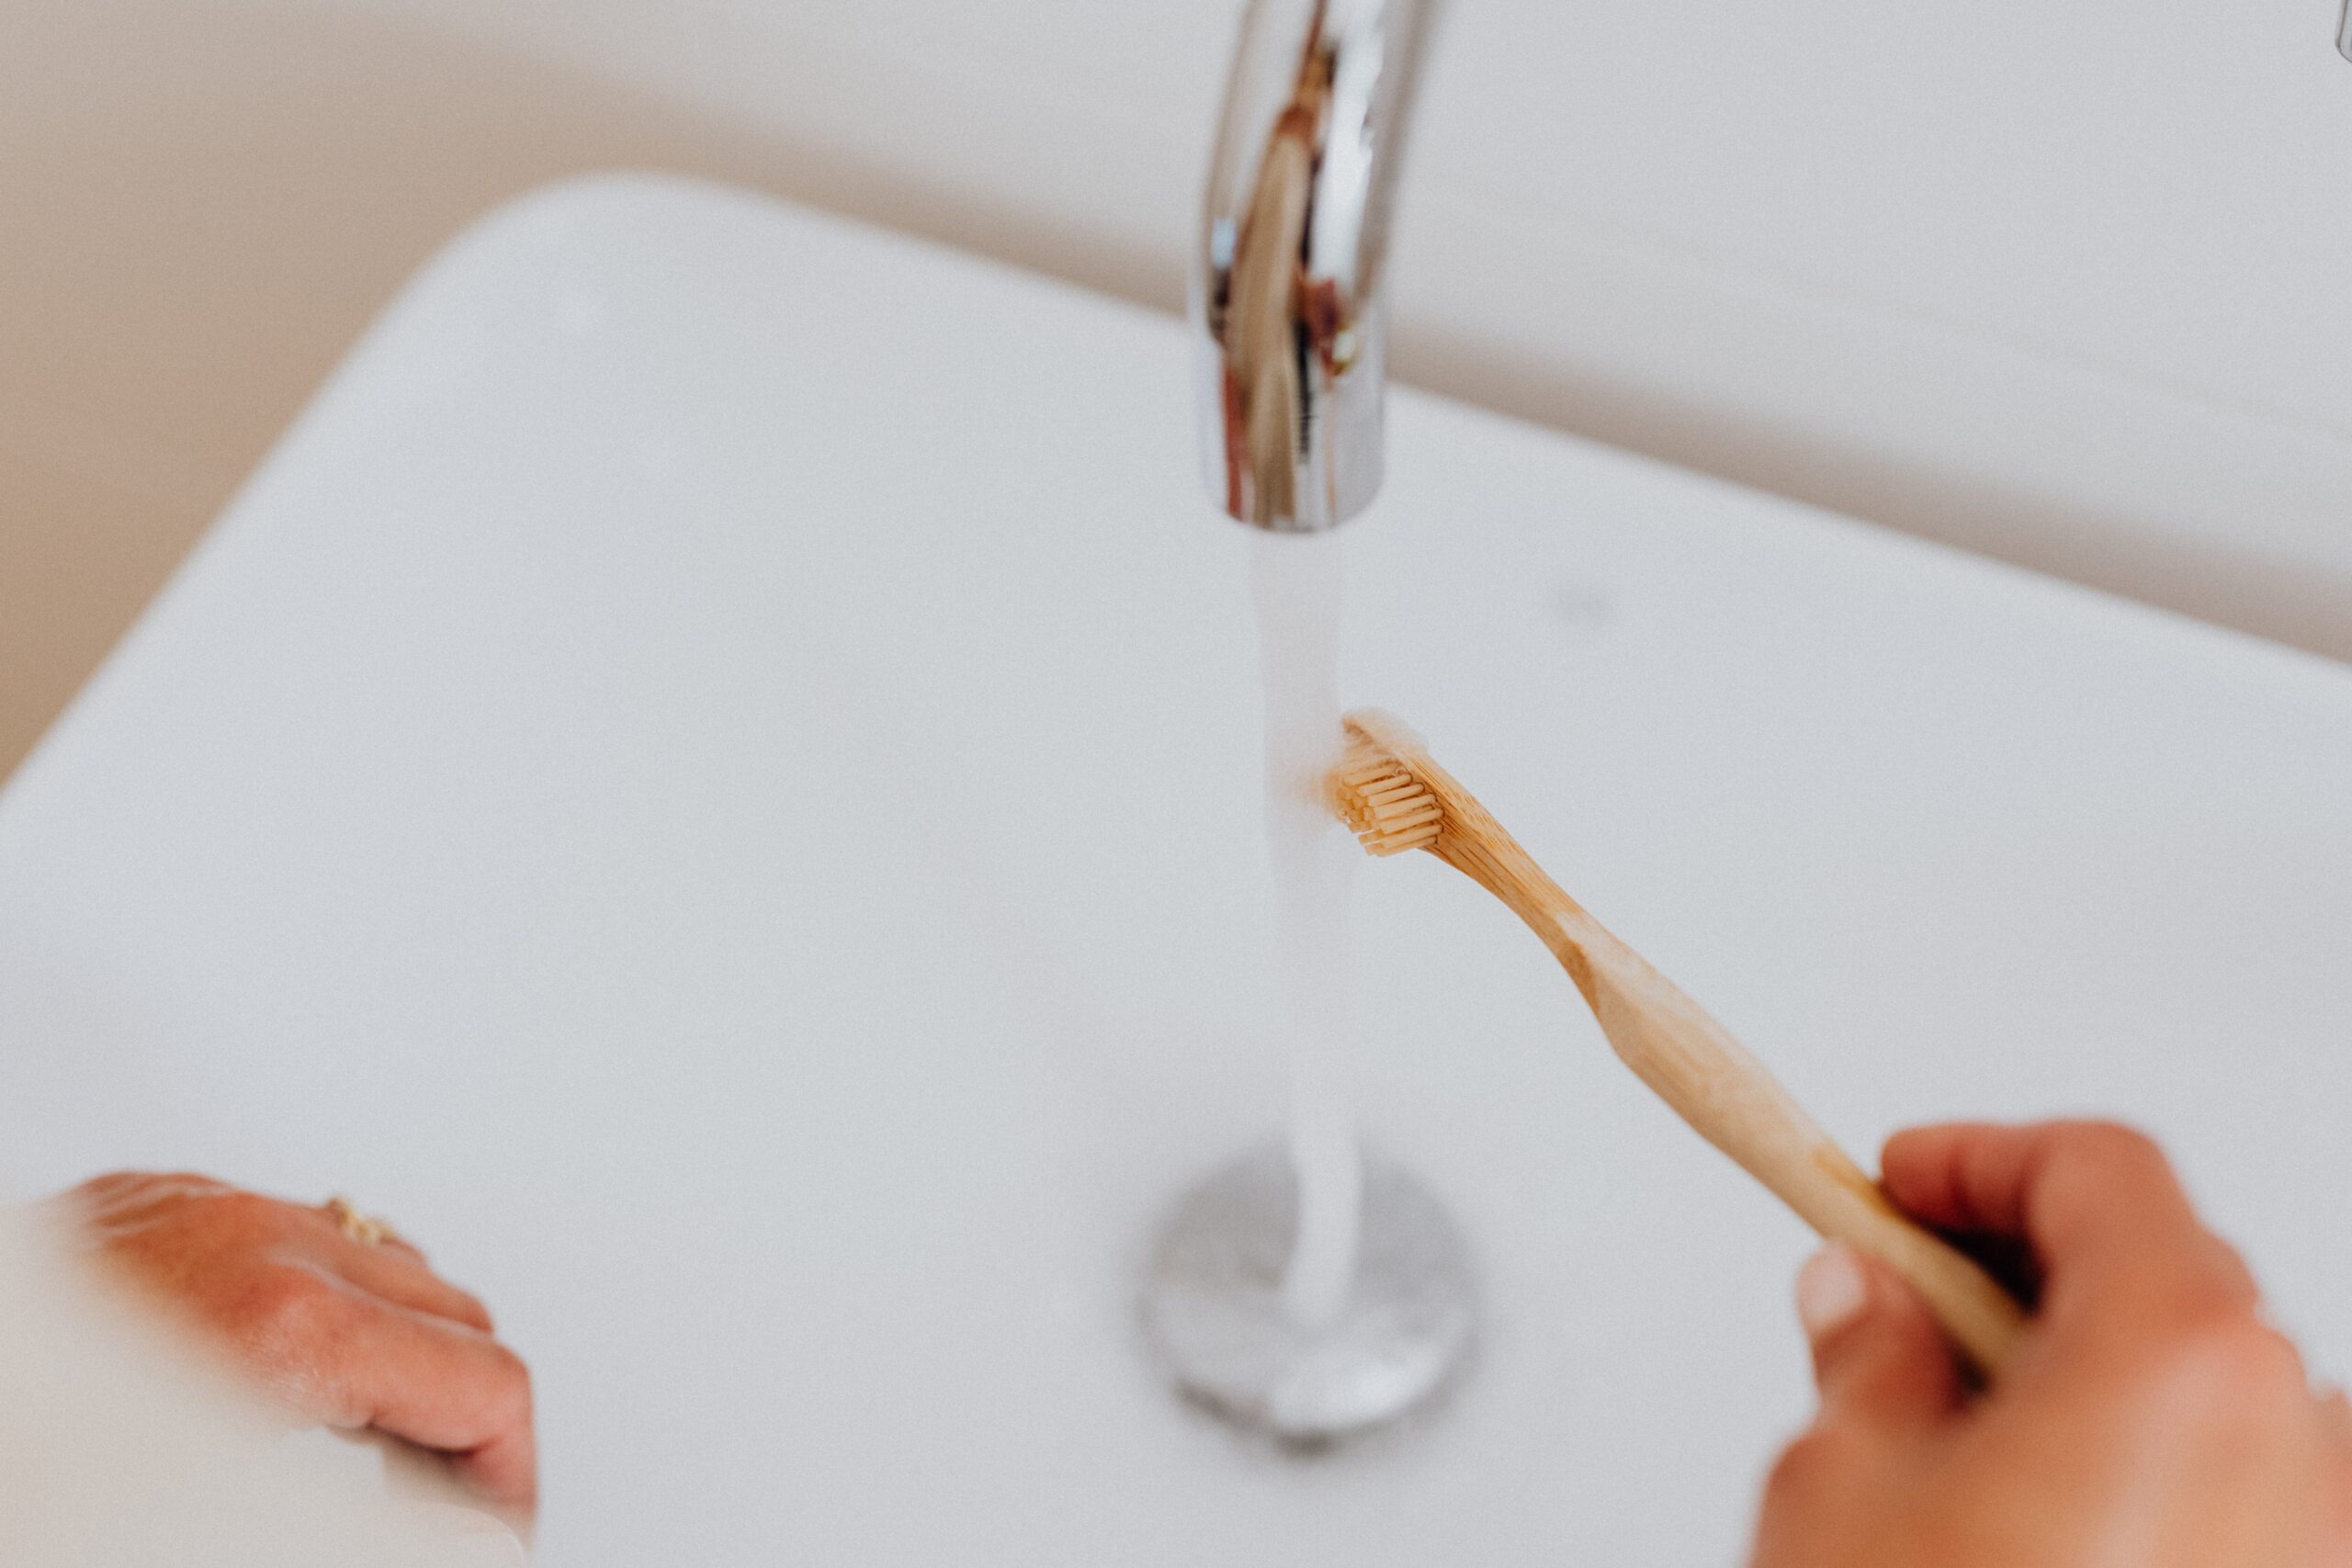 A hand holding a wooden toothbrush under a running faucet